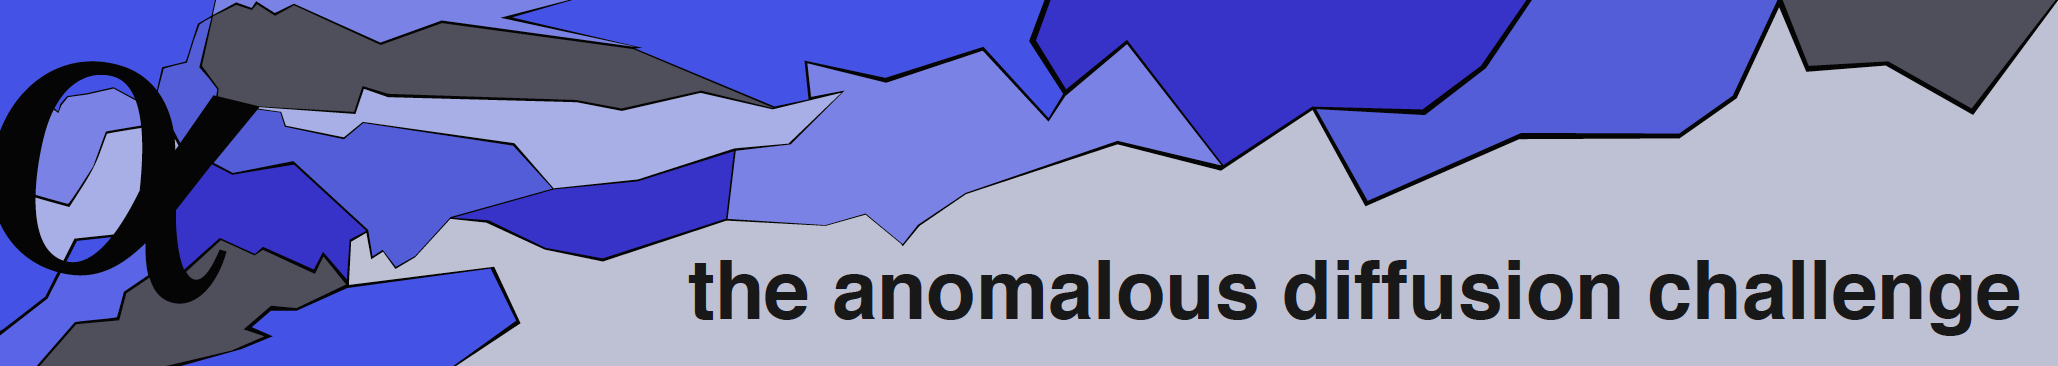 the anomalous diffusion challenge